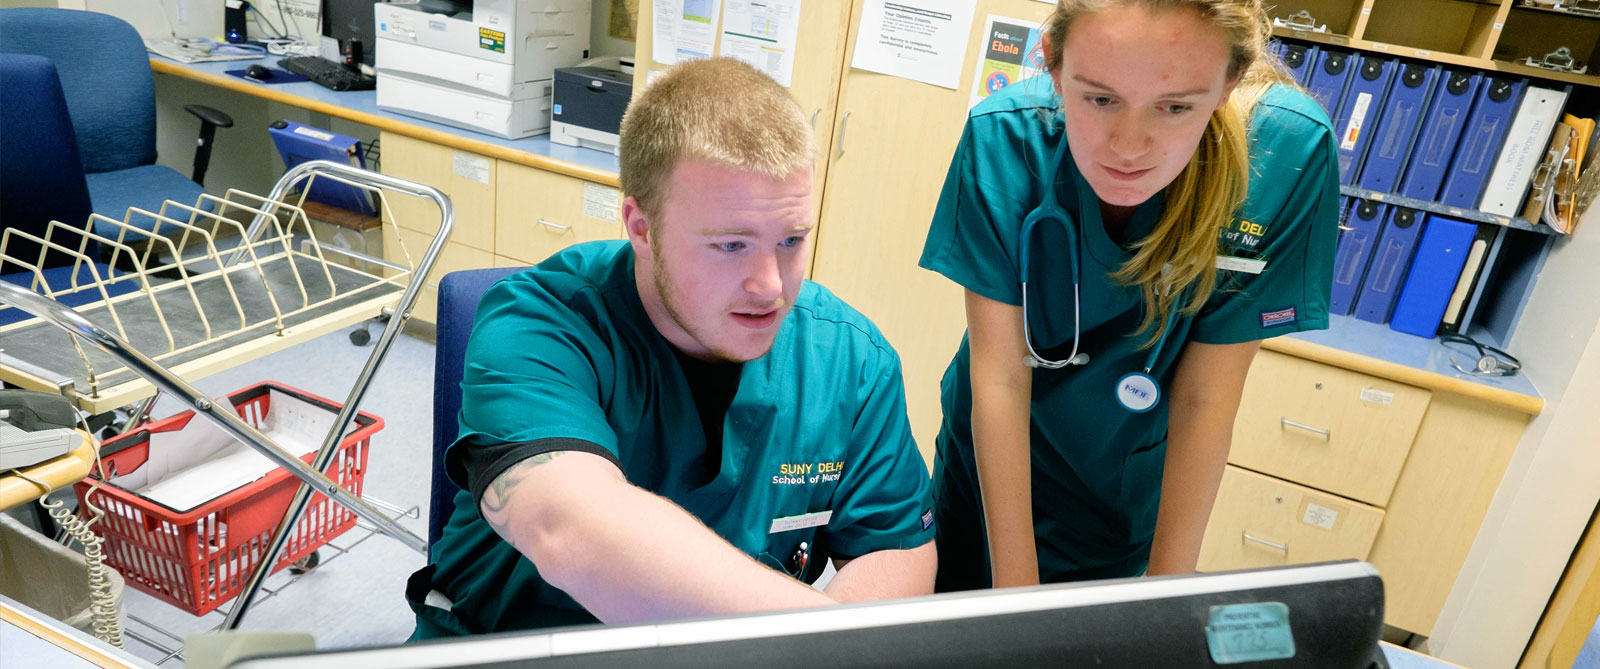 Two Nursing Students in scrubs looking at monitor